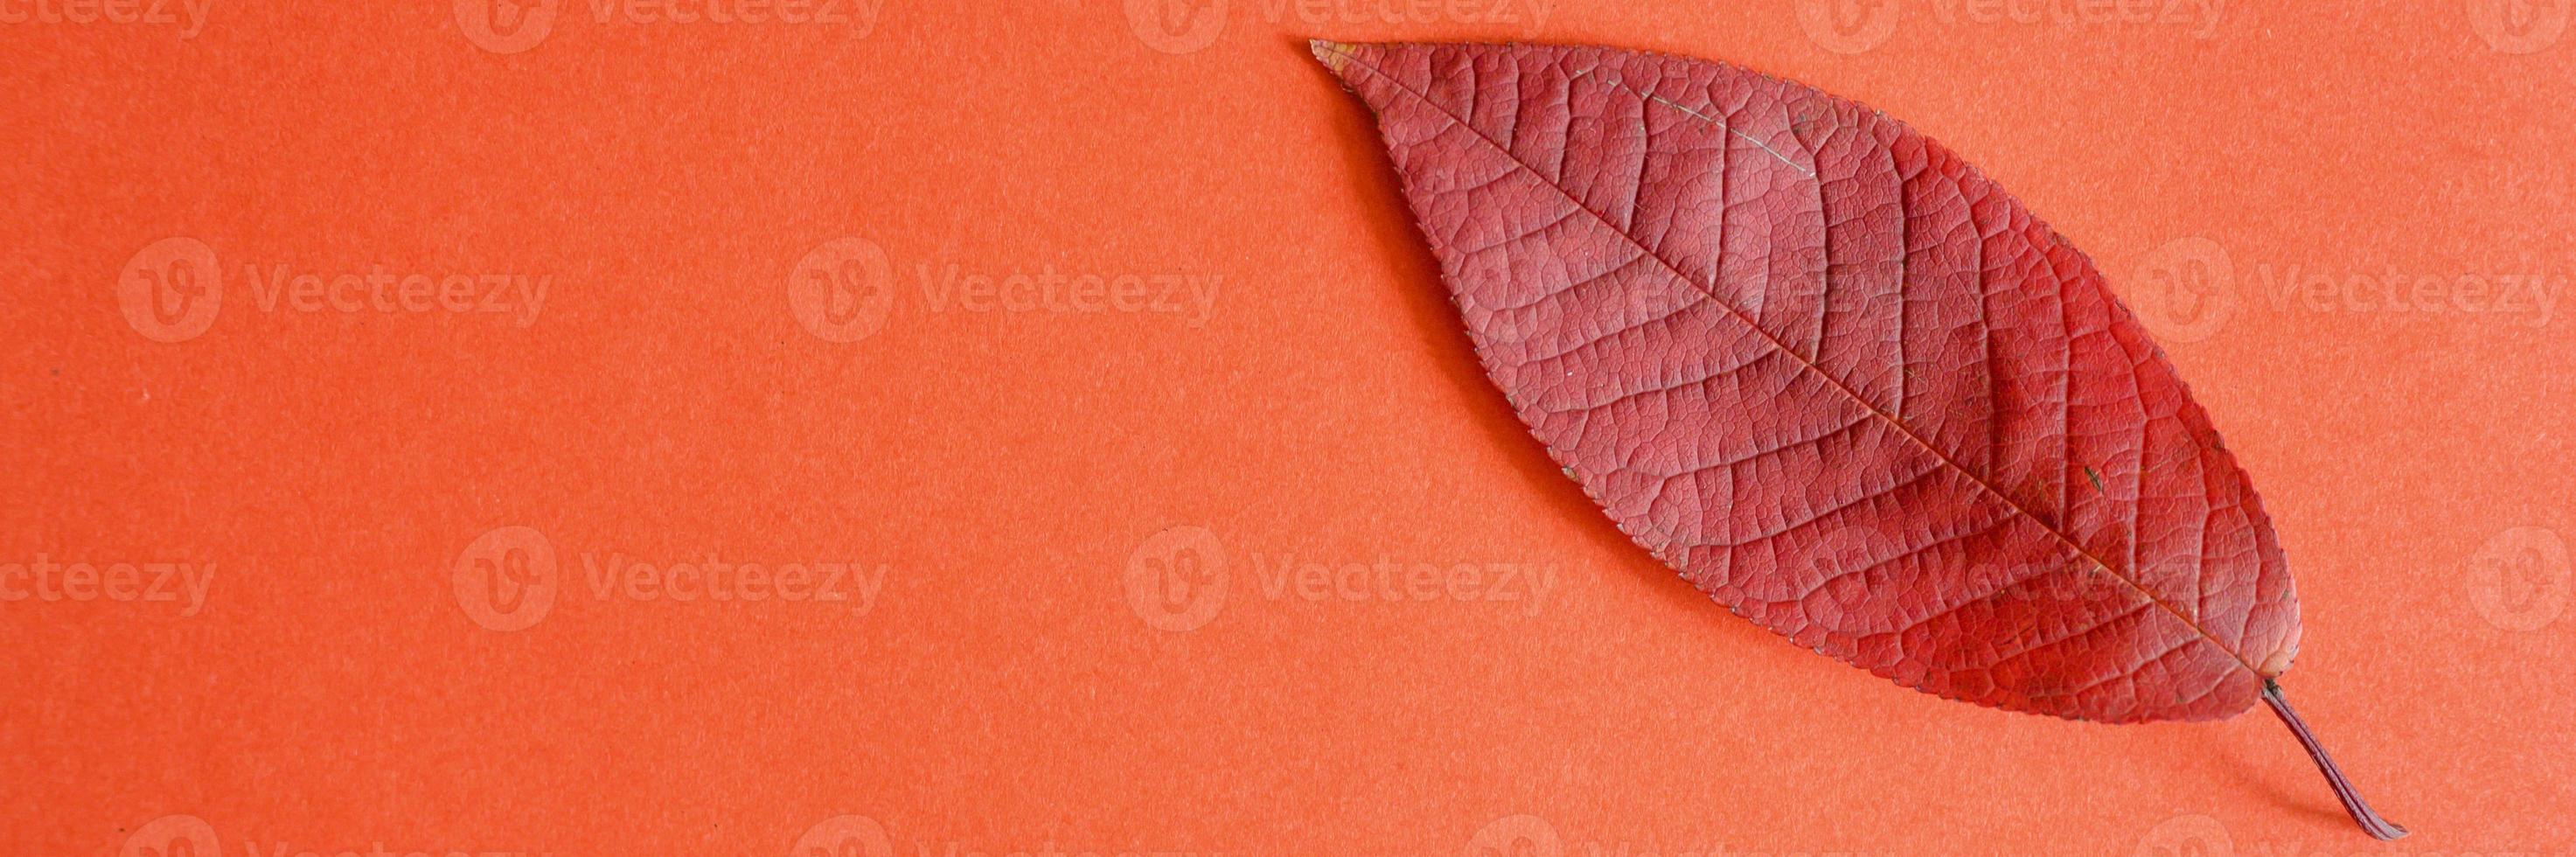 Red fallen autumn cherry leaf on a red paper background photo